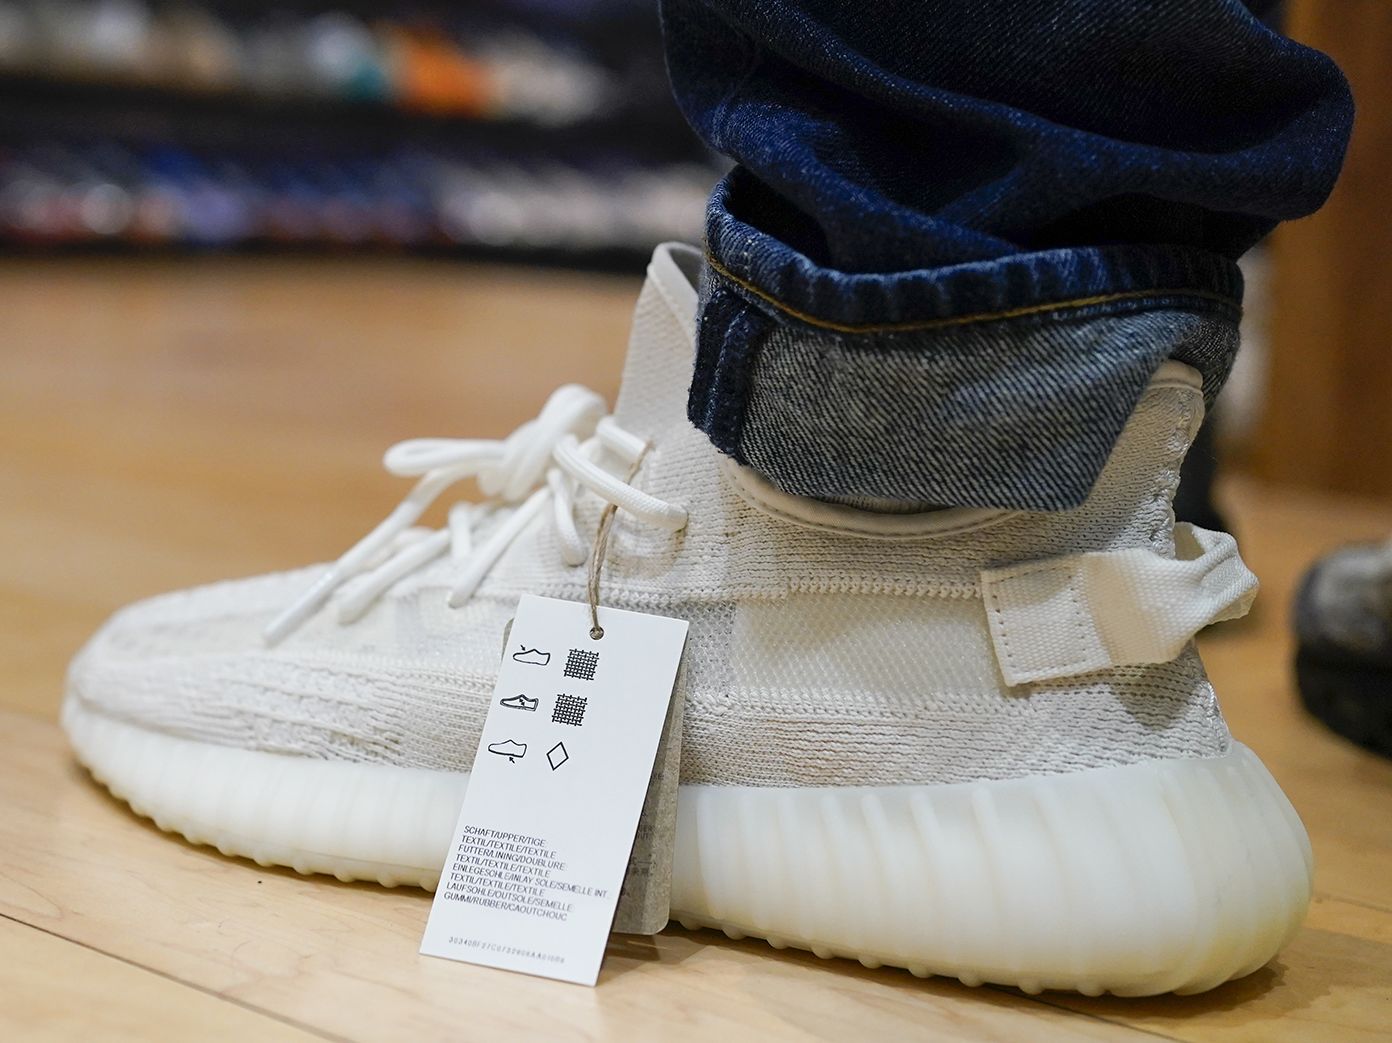 Yeezy x Adidas official pairing list and date for Yeezy's latest inventory